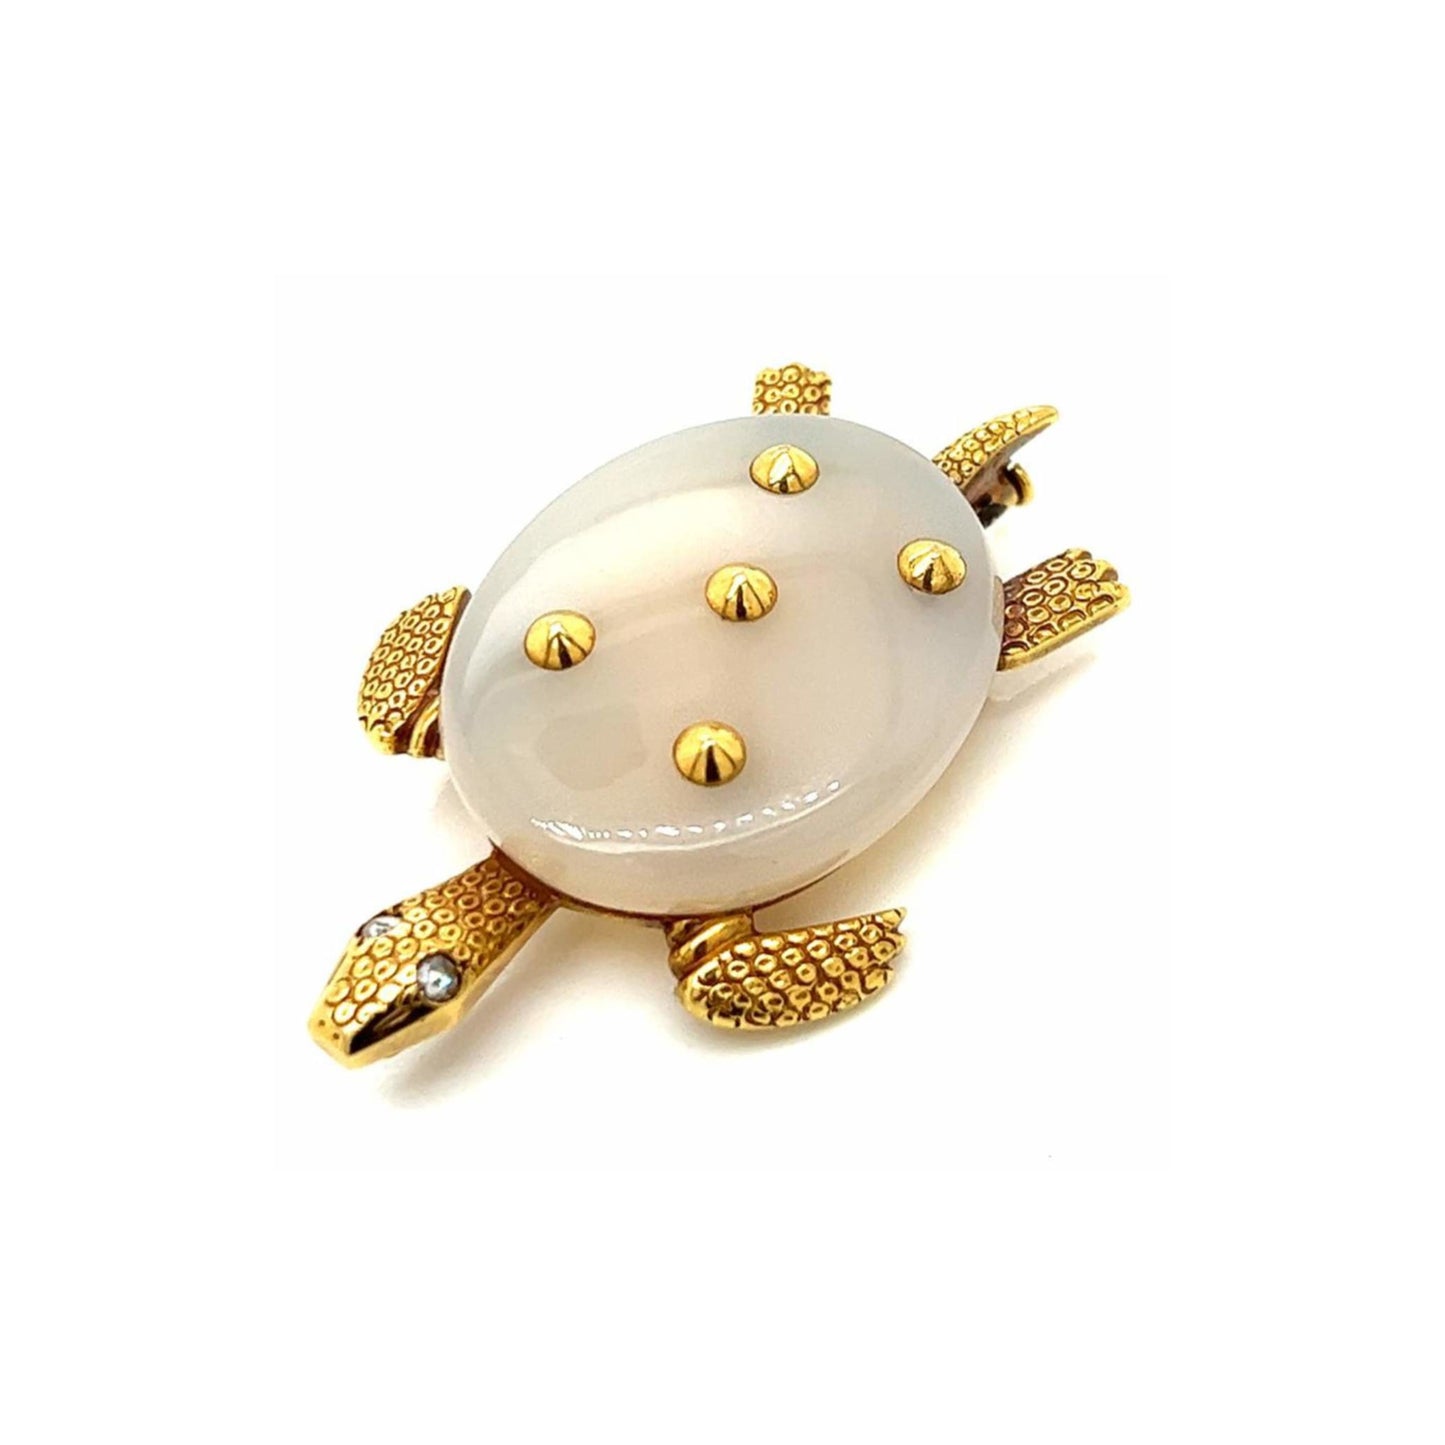 Cartier Paris 1960s 18KT Yellow Gold Chalcedony Turtle Brooch front